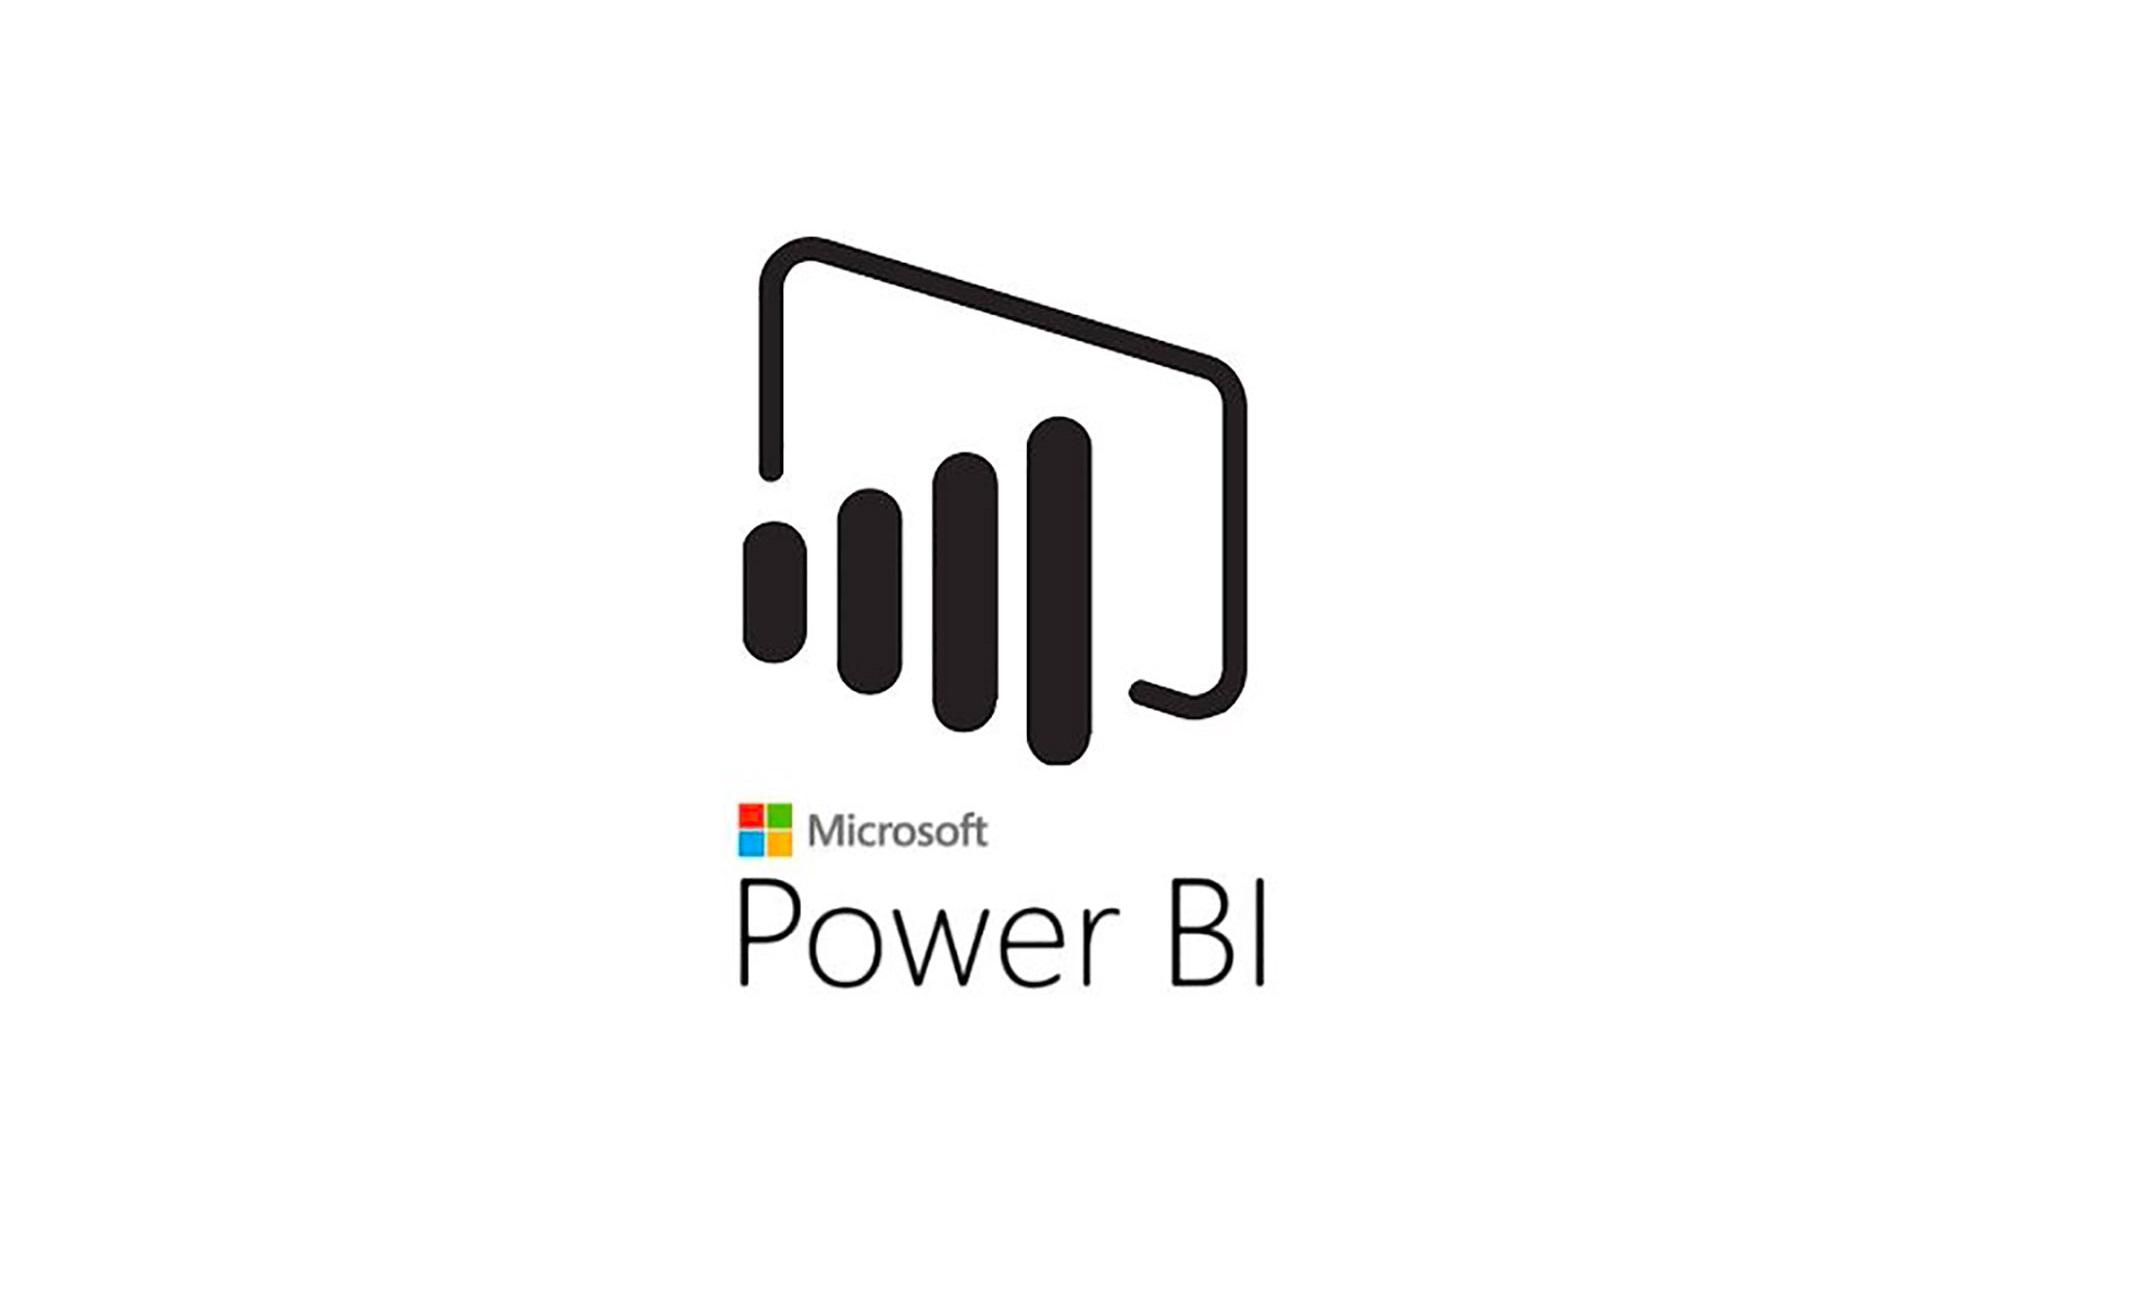 Microsoft Power BI Training in Chula Vista | Introduction to Power BI training for beginners | Getting started with Power BI | What is Power BI | January 18, 2020 - February 09, 2020